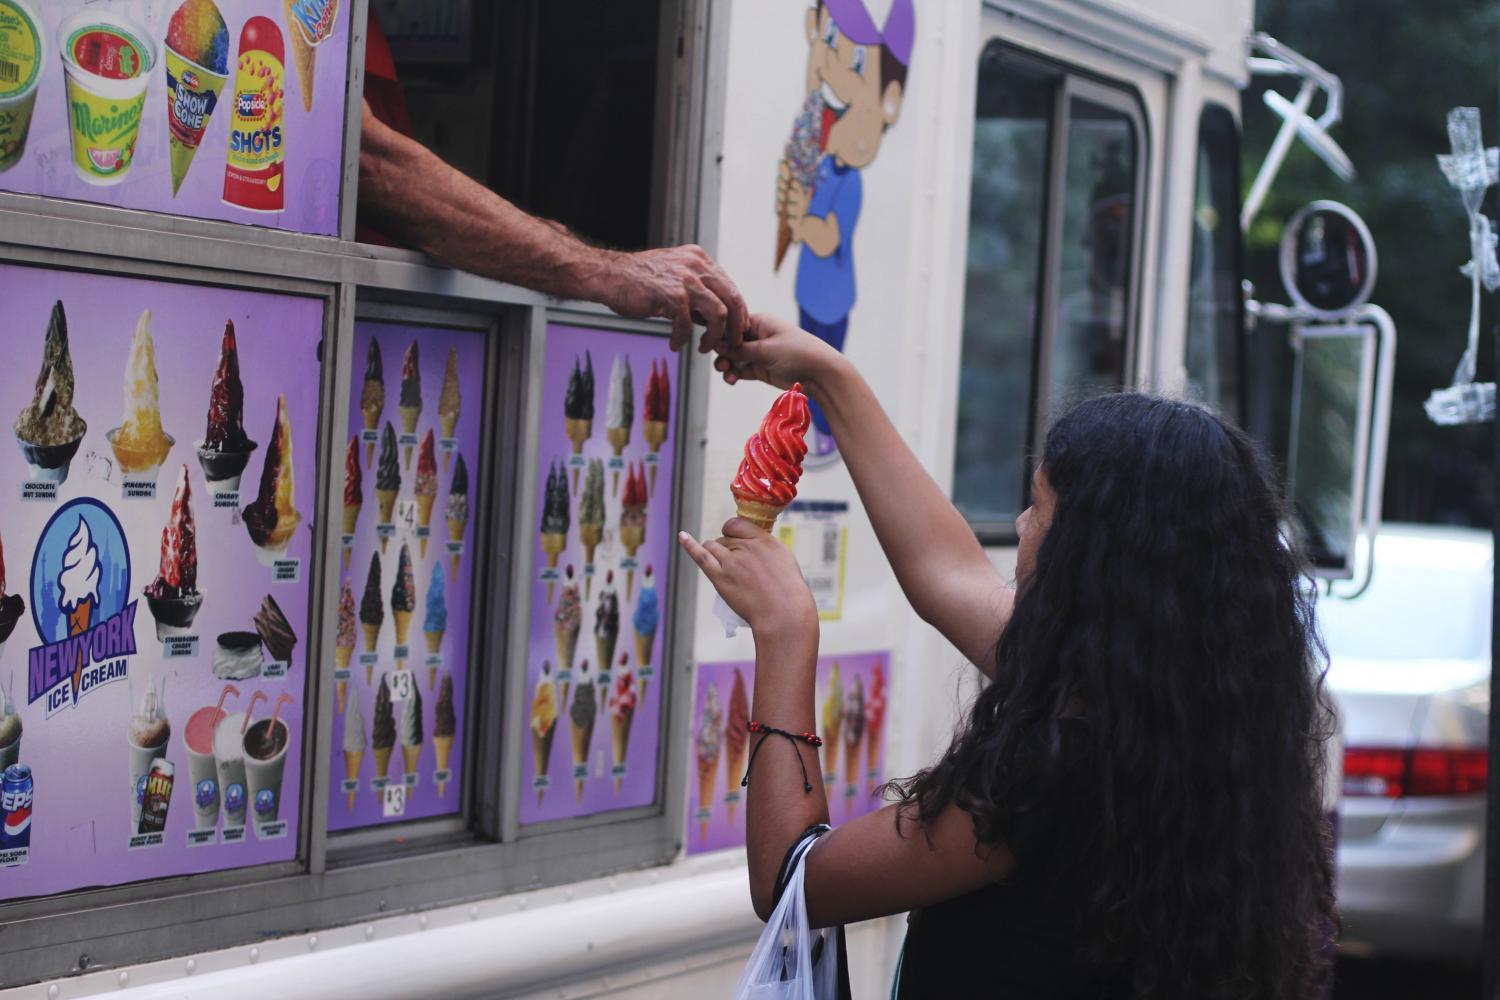 
Ice cream trucks can be found on any side of Washington Square Park on any day that the weather isn’t gloomy.
